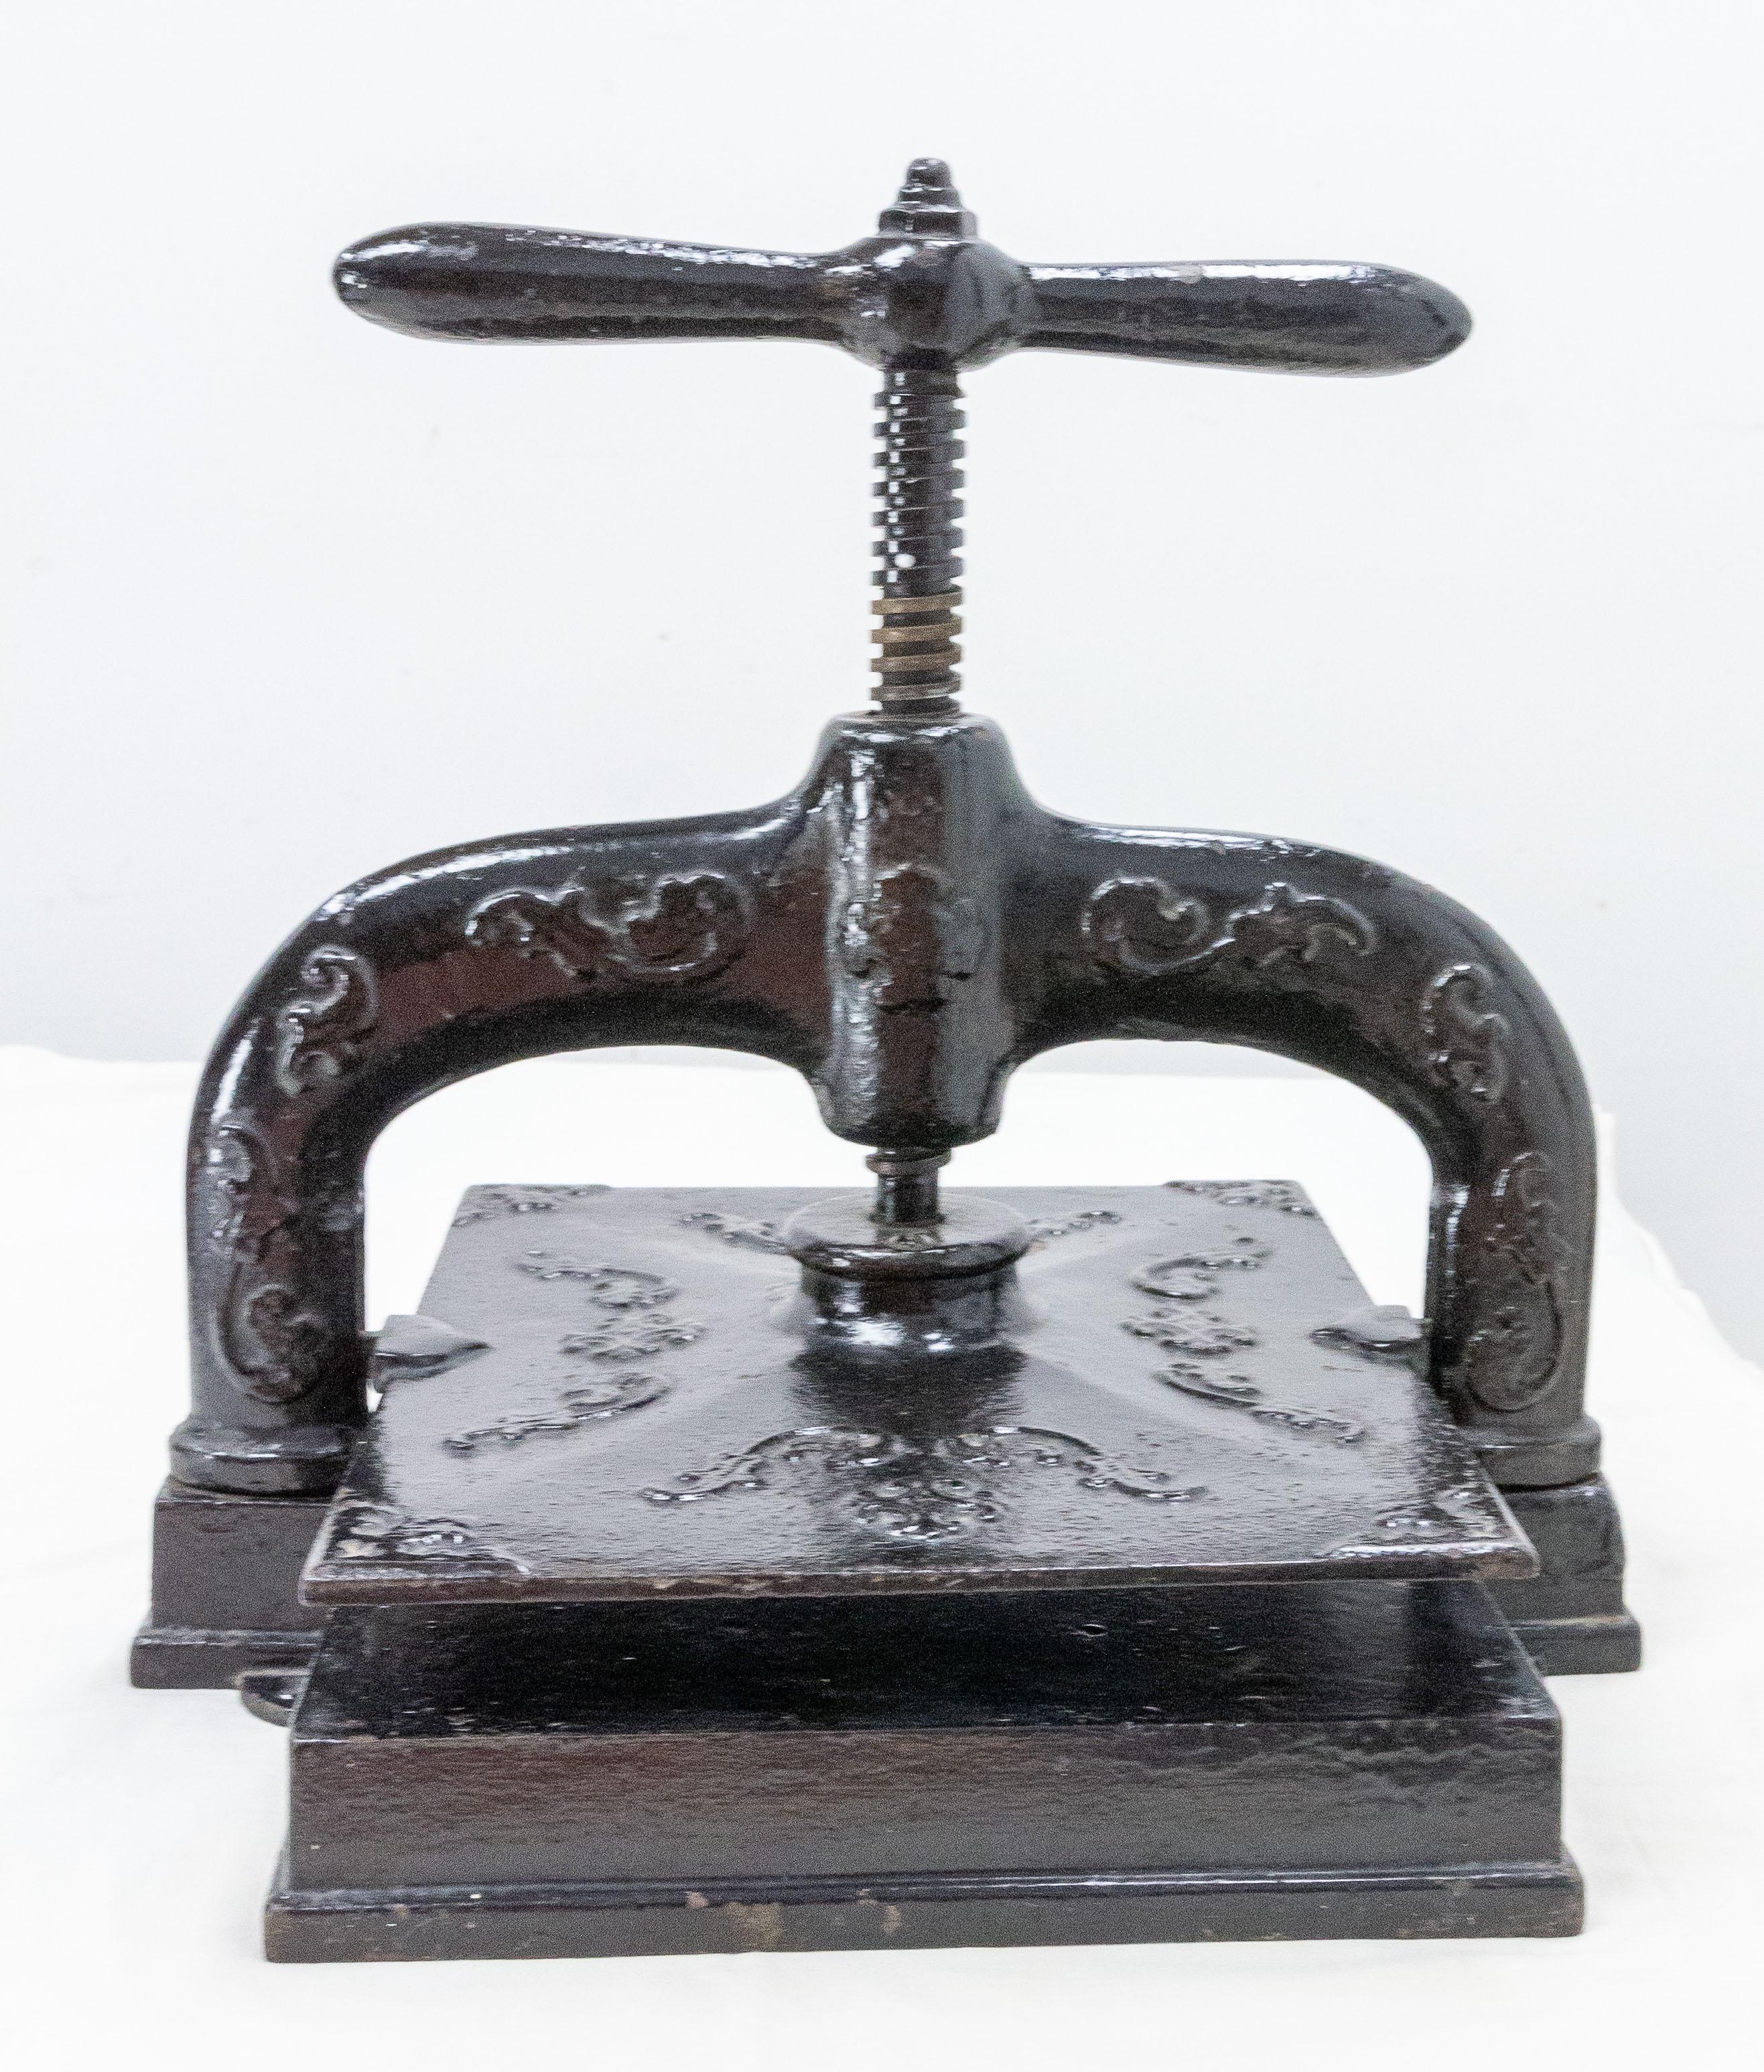 This wrought iron book press was made in the late 19th century in France for a workshop
Patina and signs of use which make this antique object very characterful.

Shipping:
P30 L33 H 30 12.4 kg.